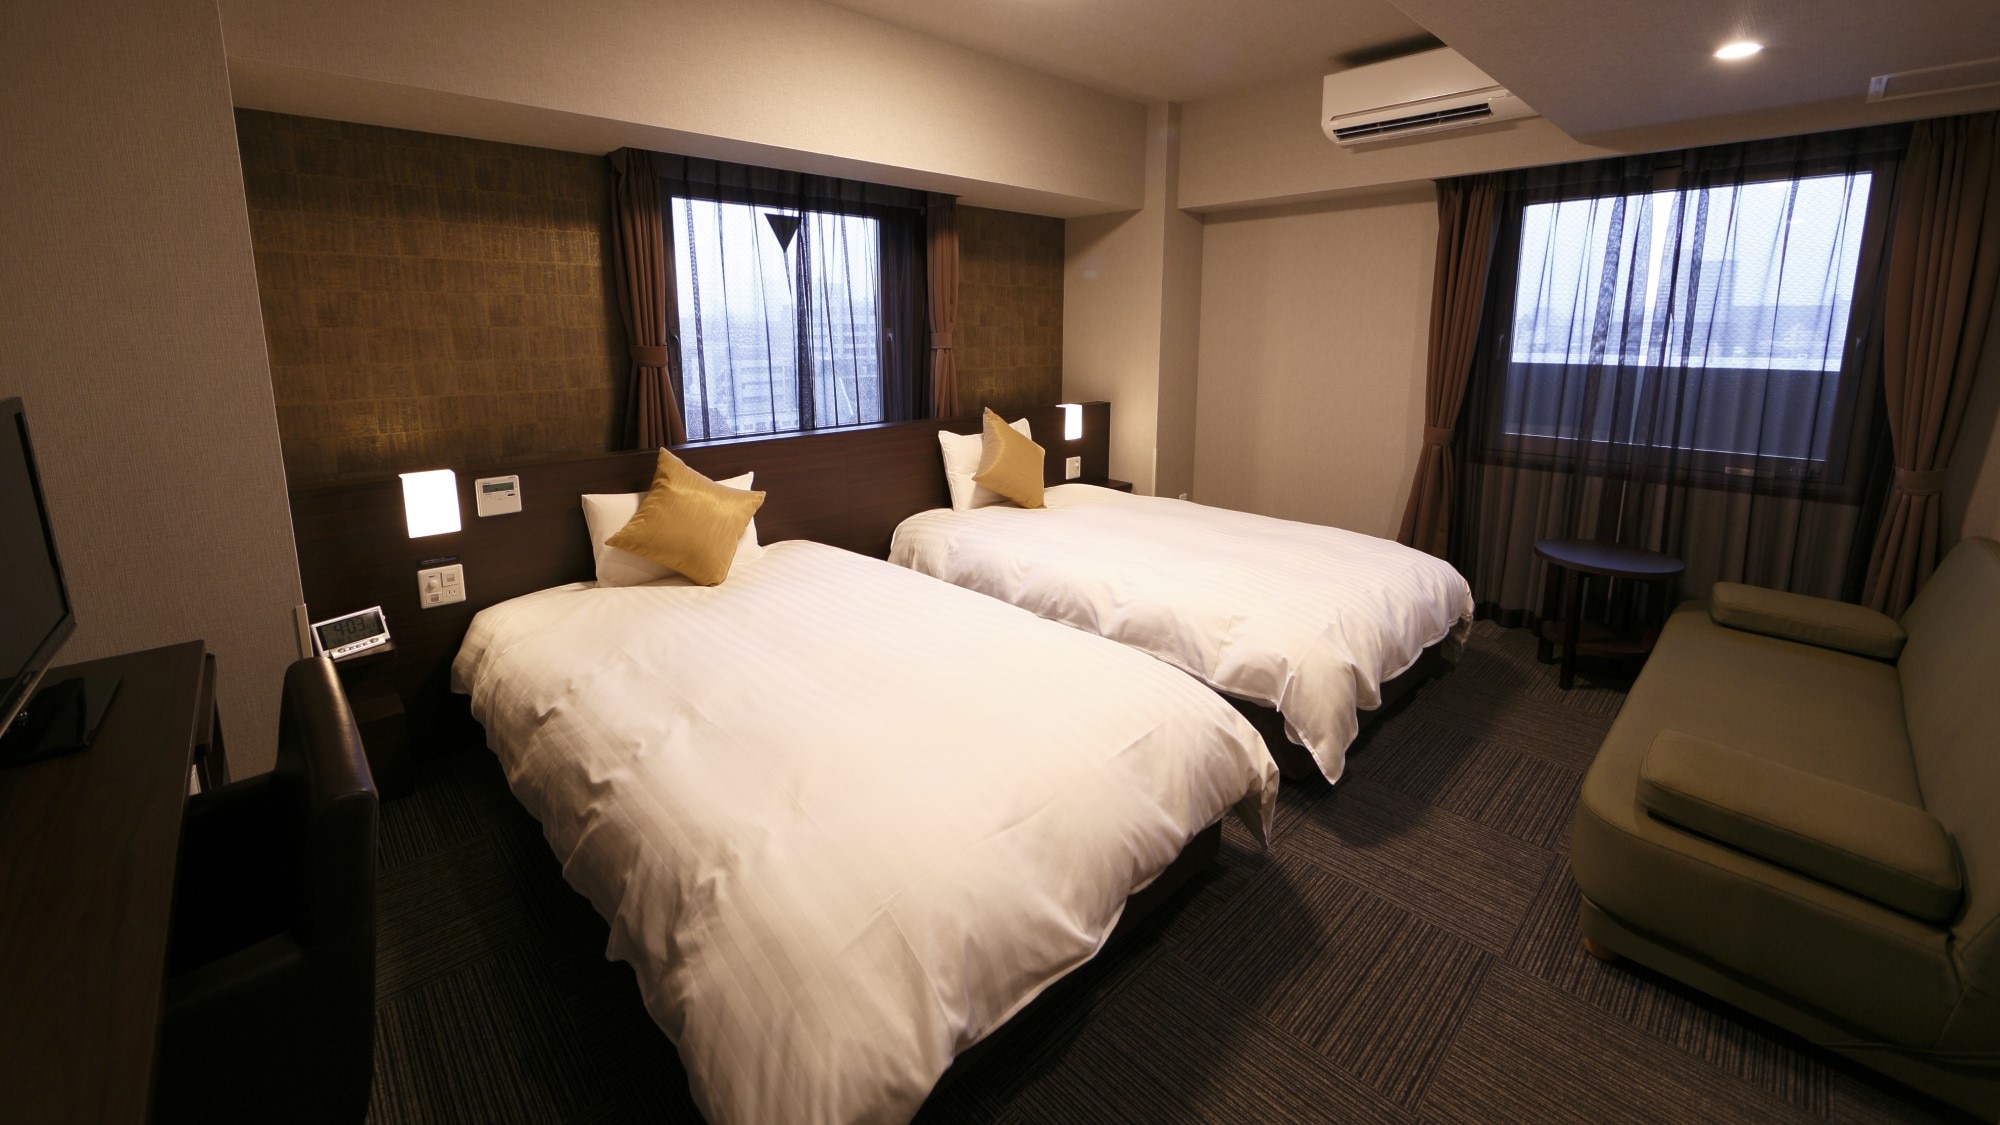 ◆ Triple room 26 square meters with 32 inch TV (Bets are available only for adults)